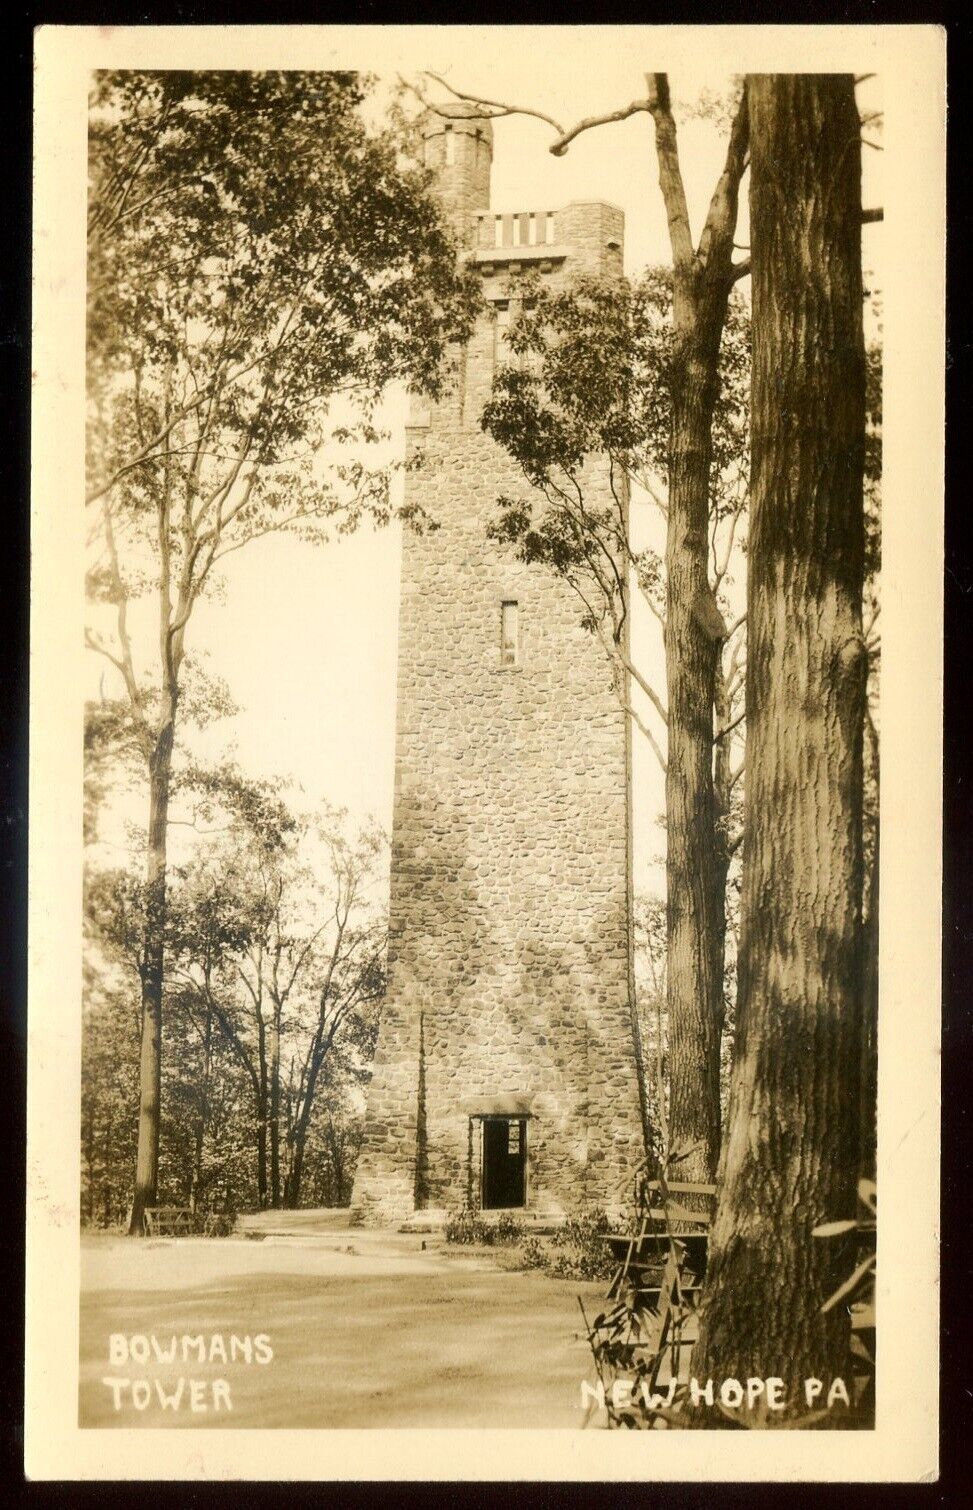 NEW HOPE Pennsylvania 1930s Bowmans Tower. Real Photo Postcard by Hayes